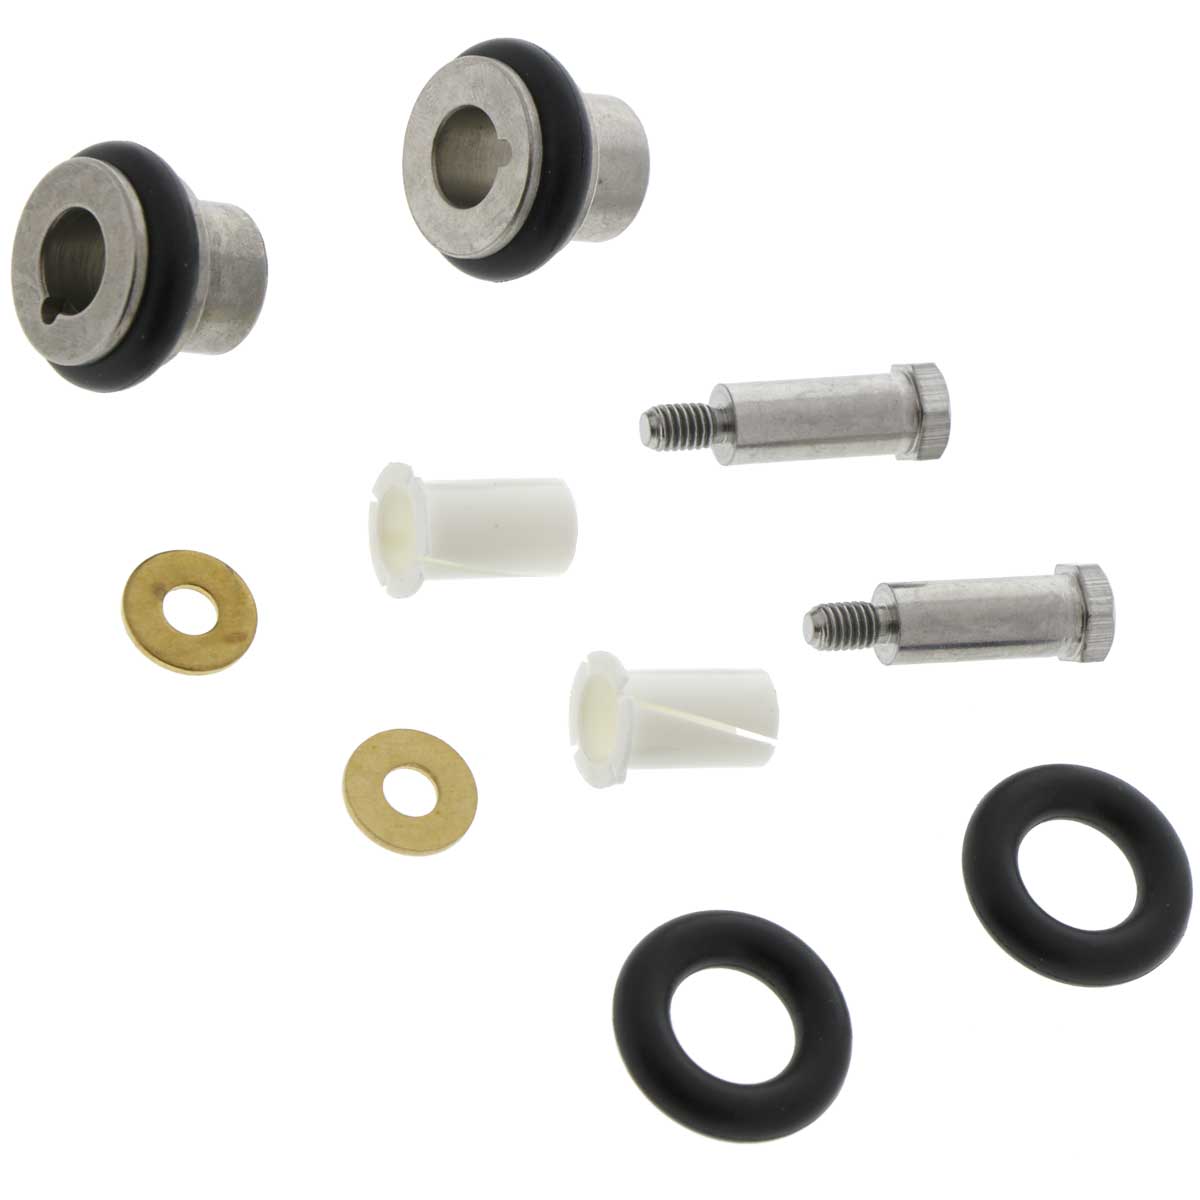 TapeTech EasyRoll Replacement Kit